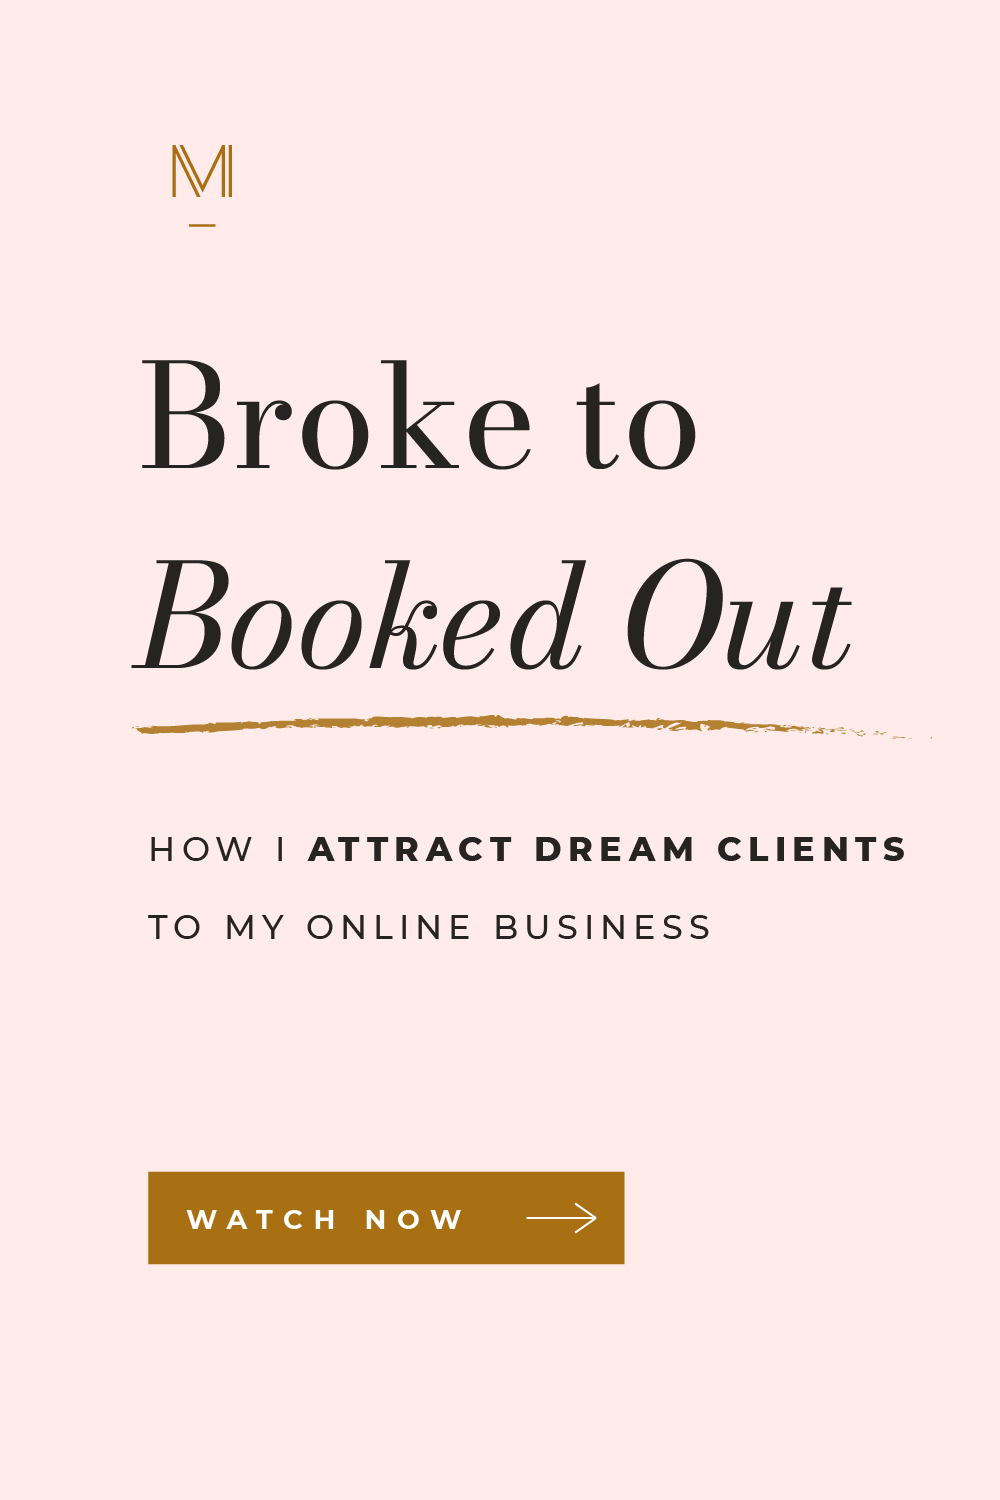 Wondering how a luxury branding strategy can take your online coaching business from struggling to booked out with dream clients? This video is for you! I’m sharing the secrets of creating a captivating luxury brand that attracts your dream clients effortlessly. Perfect for life coaches eager to elevate their brand. #LuxuryBranding #LifeCoach #LifeCoaching #Branding